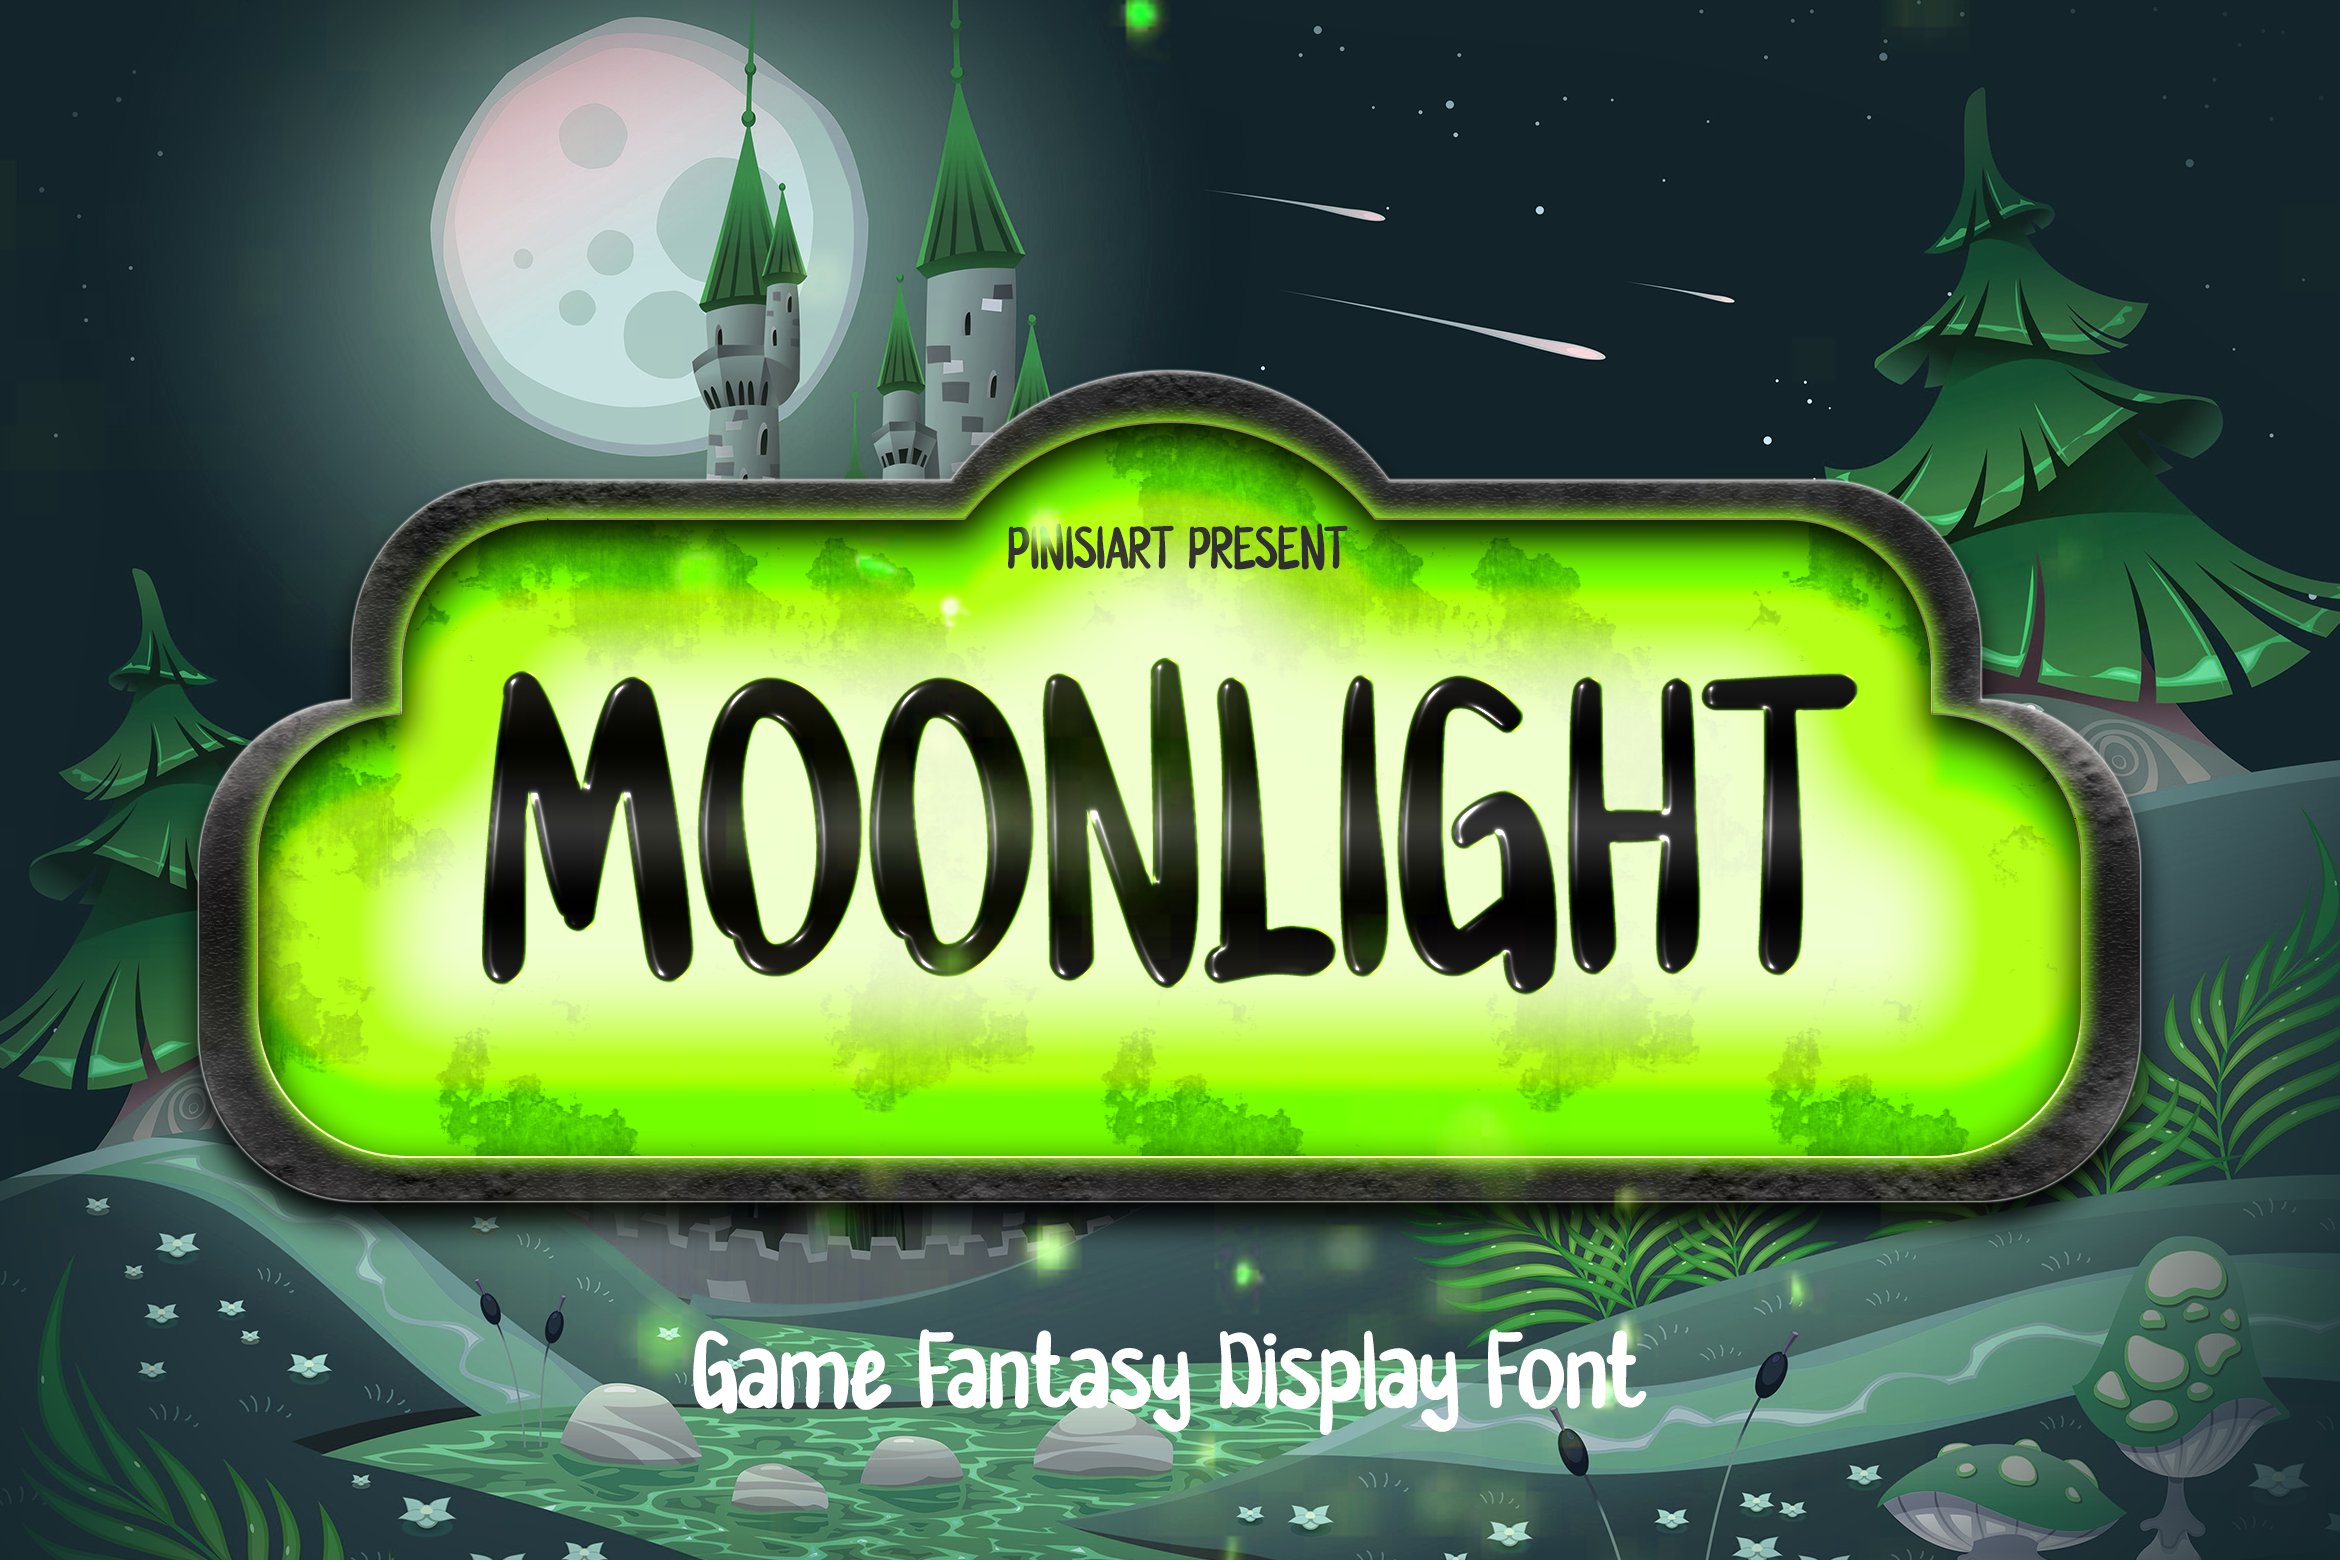 Moonlight - Game Fantasy cover image.